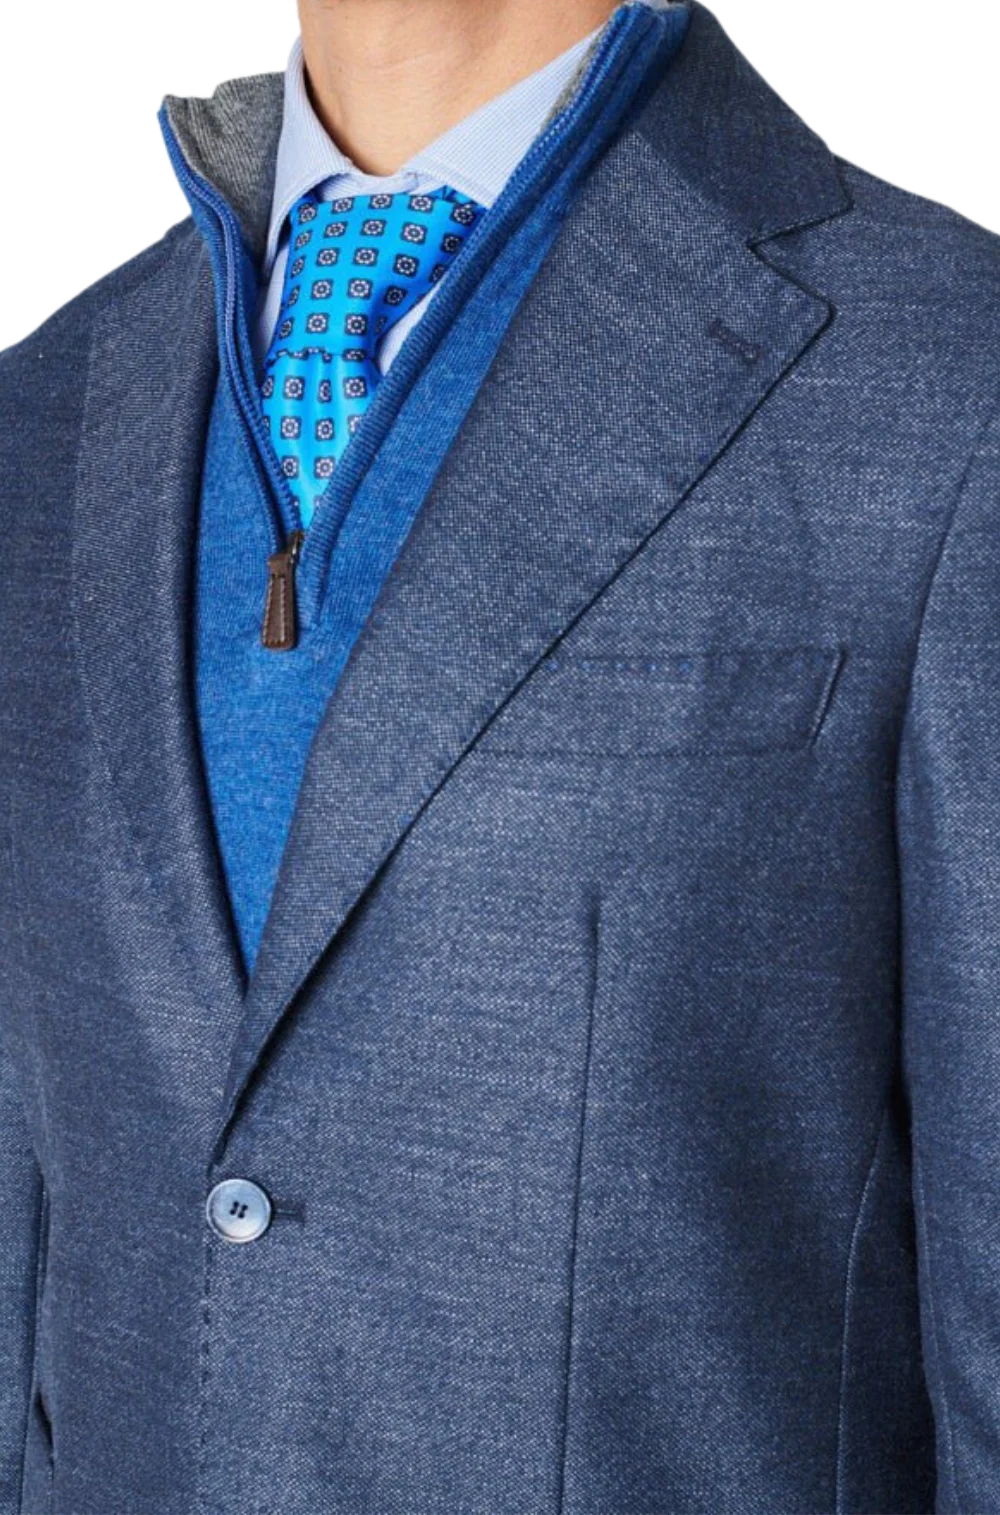 Men's Fusaro Austine Melange Wool Blend Jacket in Blue (21089) - available in-store, 337 Monty Naicker Street, Durban CBD or online at Omar's Tailors & Outfitters online store.   A men's fashion curation for South African men - established in 1911.